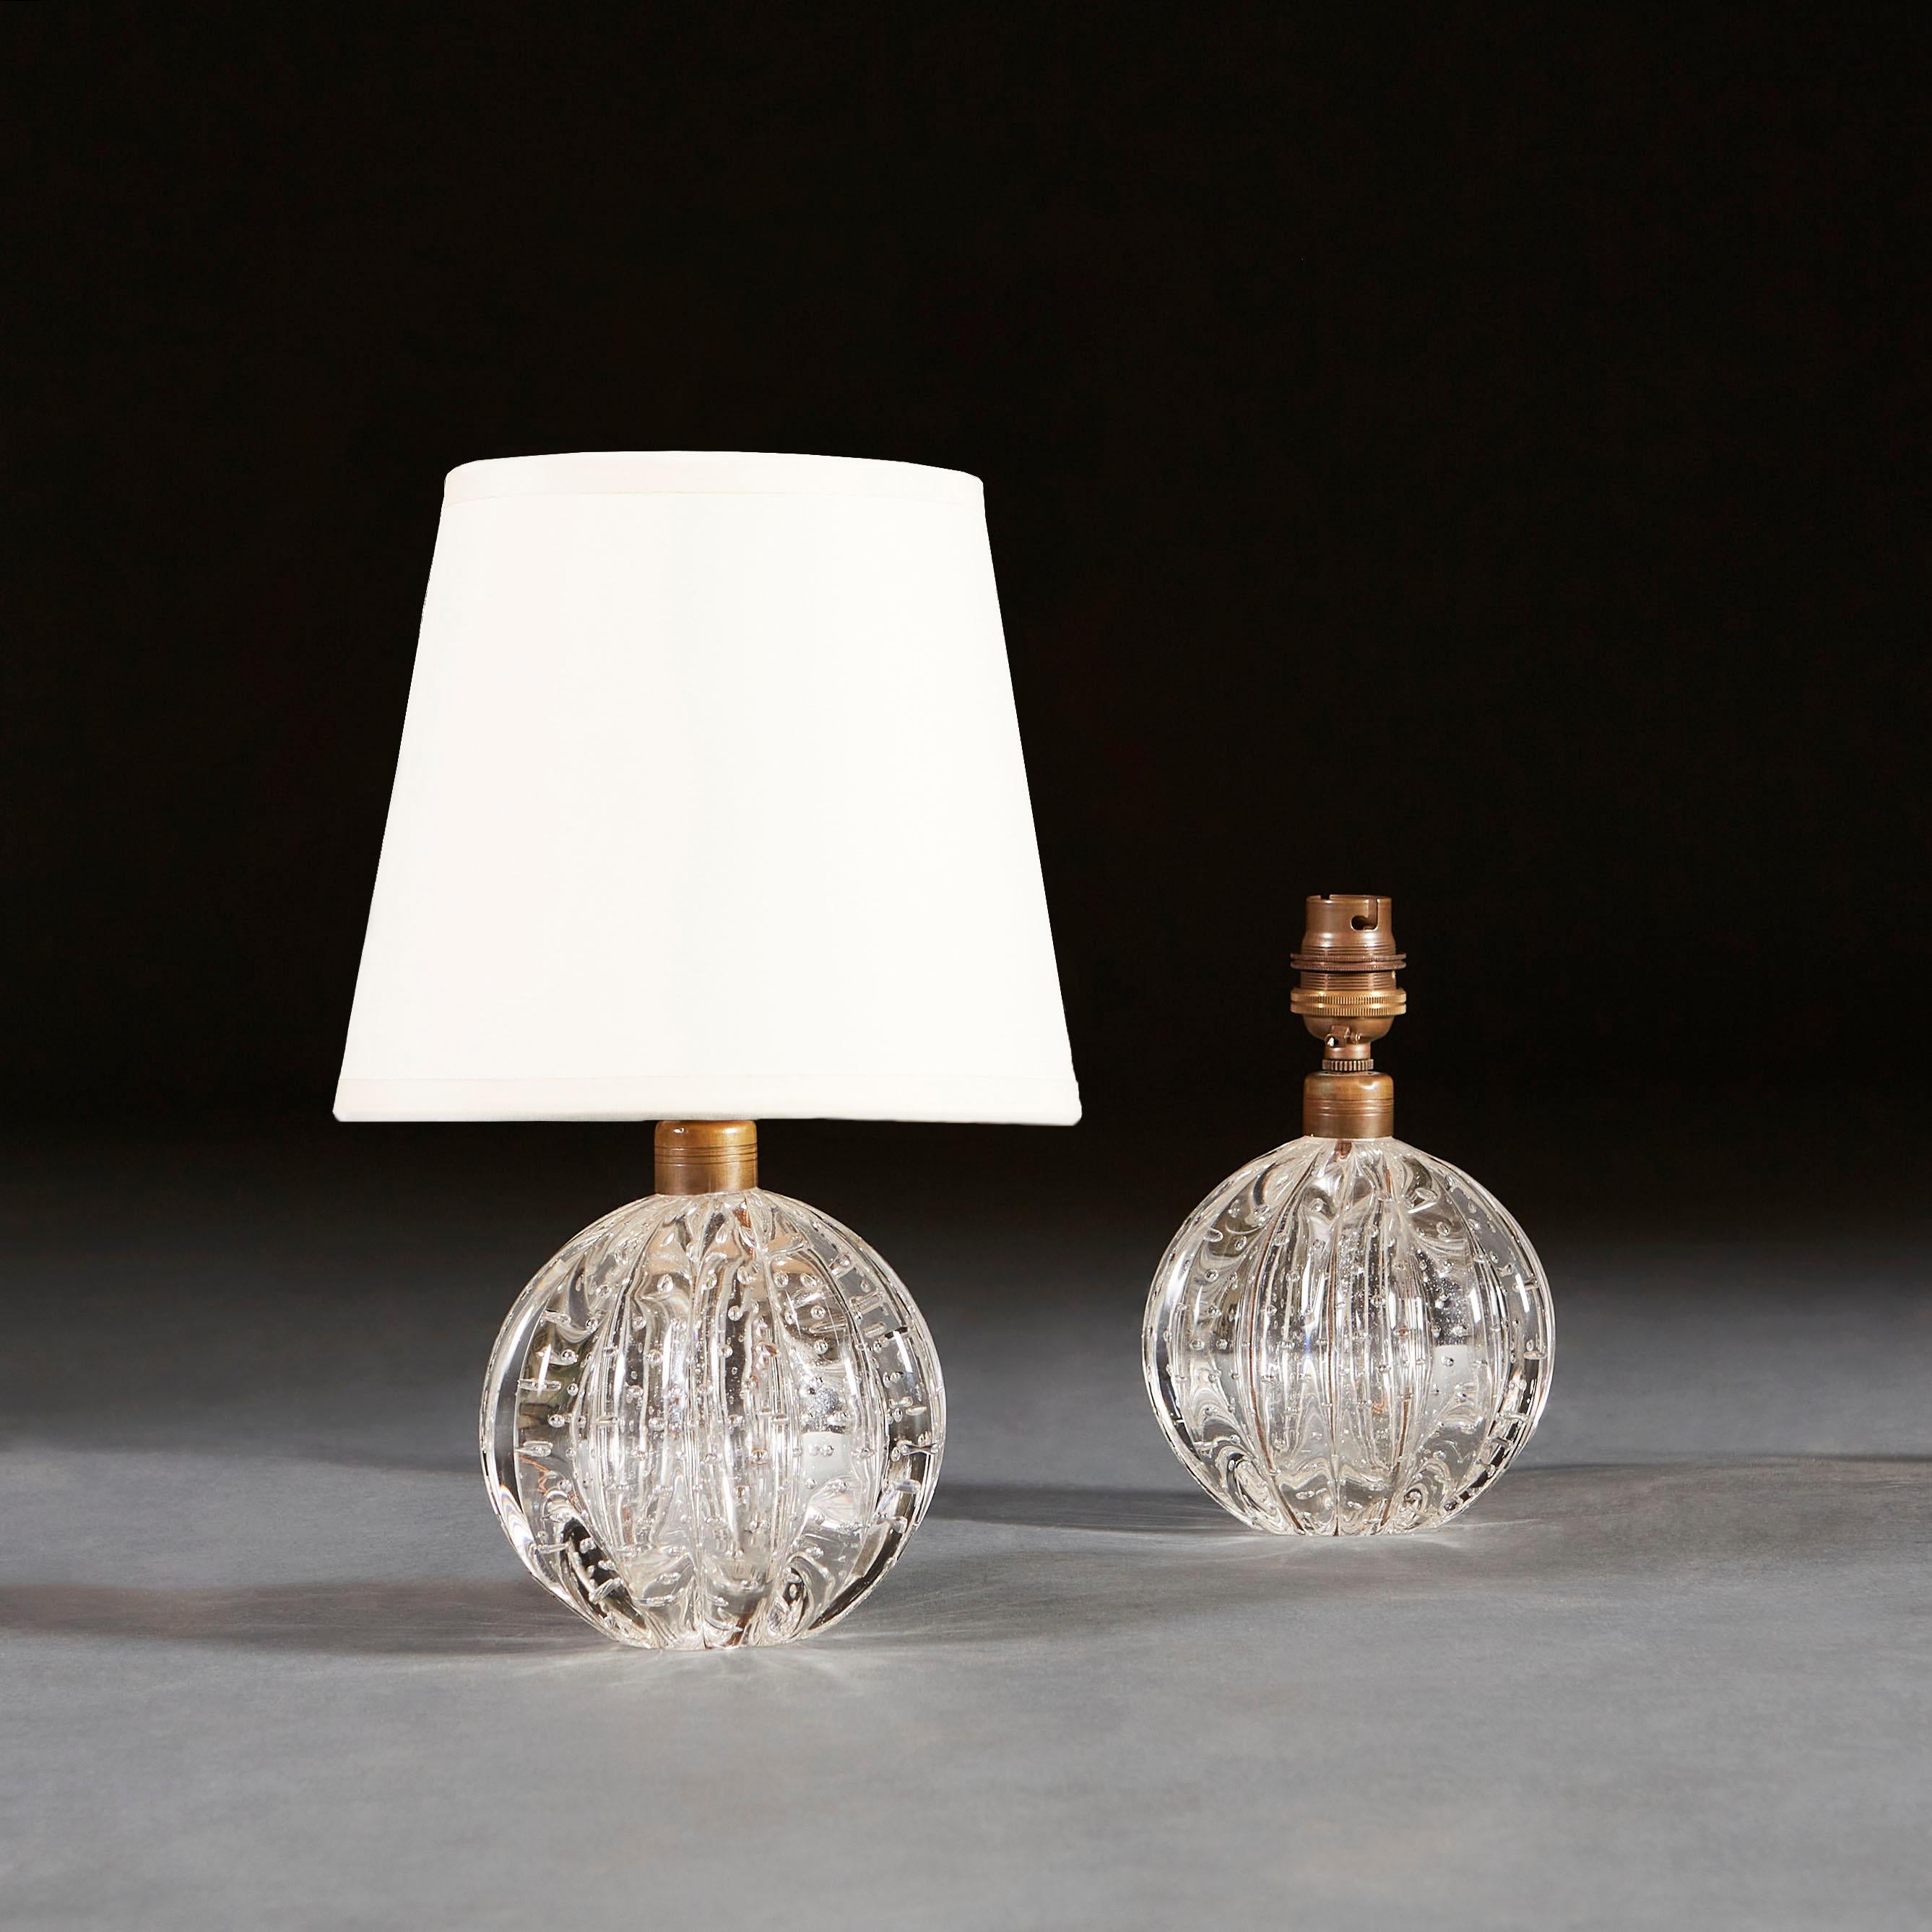 A pair of mid twentieth century bullicante Murano glass ball lamps, with gadrooning throughout Bullicante is a technique used in Murano glass to create controlled bubbles throughout a piece.

Currently wired for the UK.

Please note: lampshades